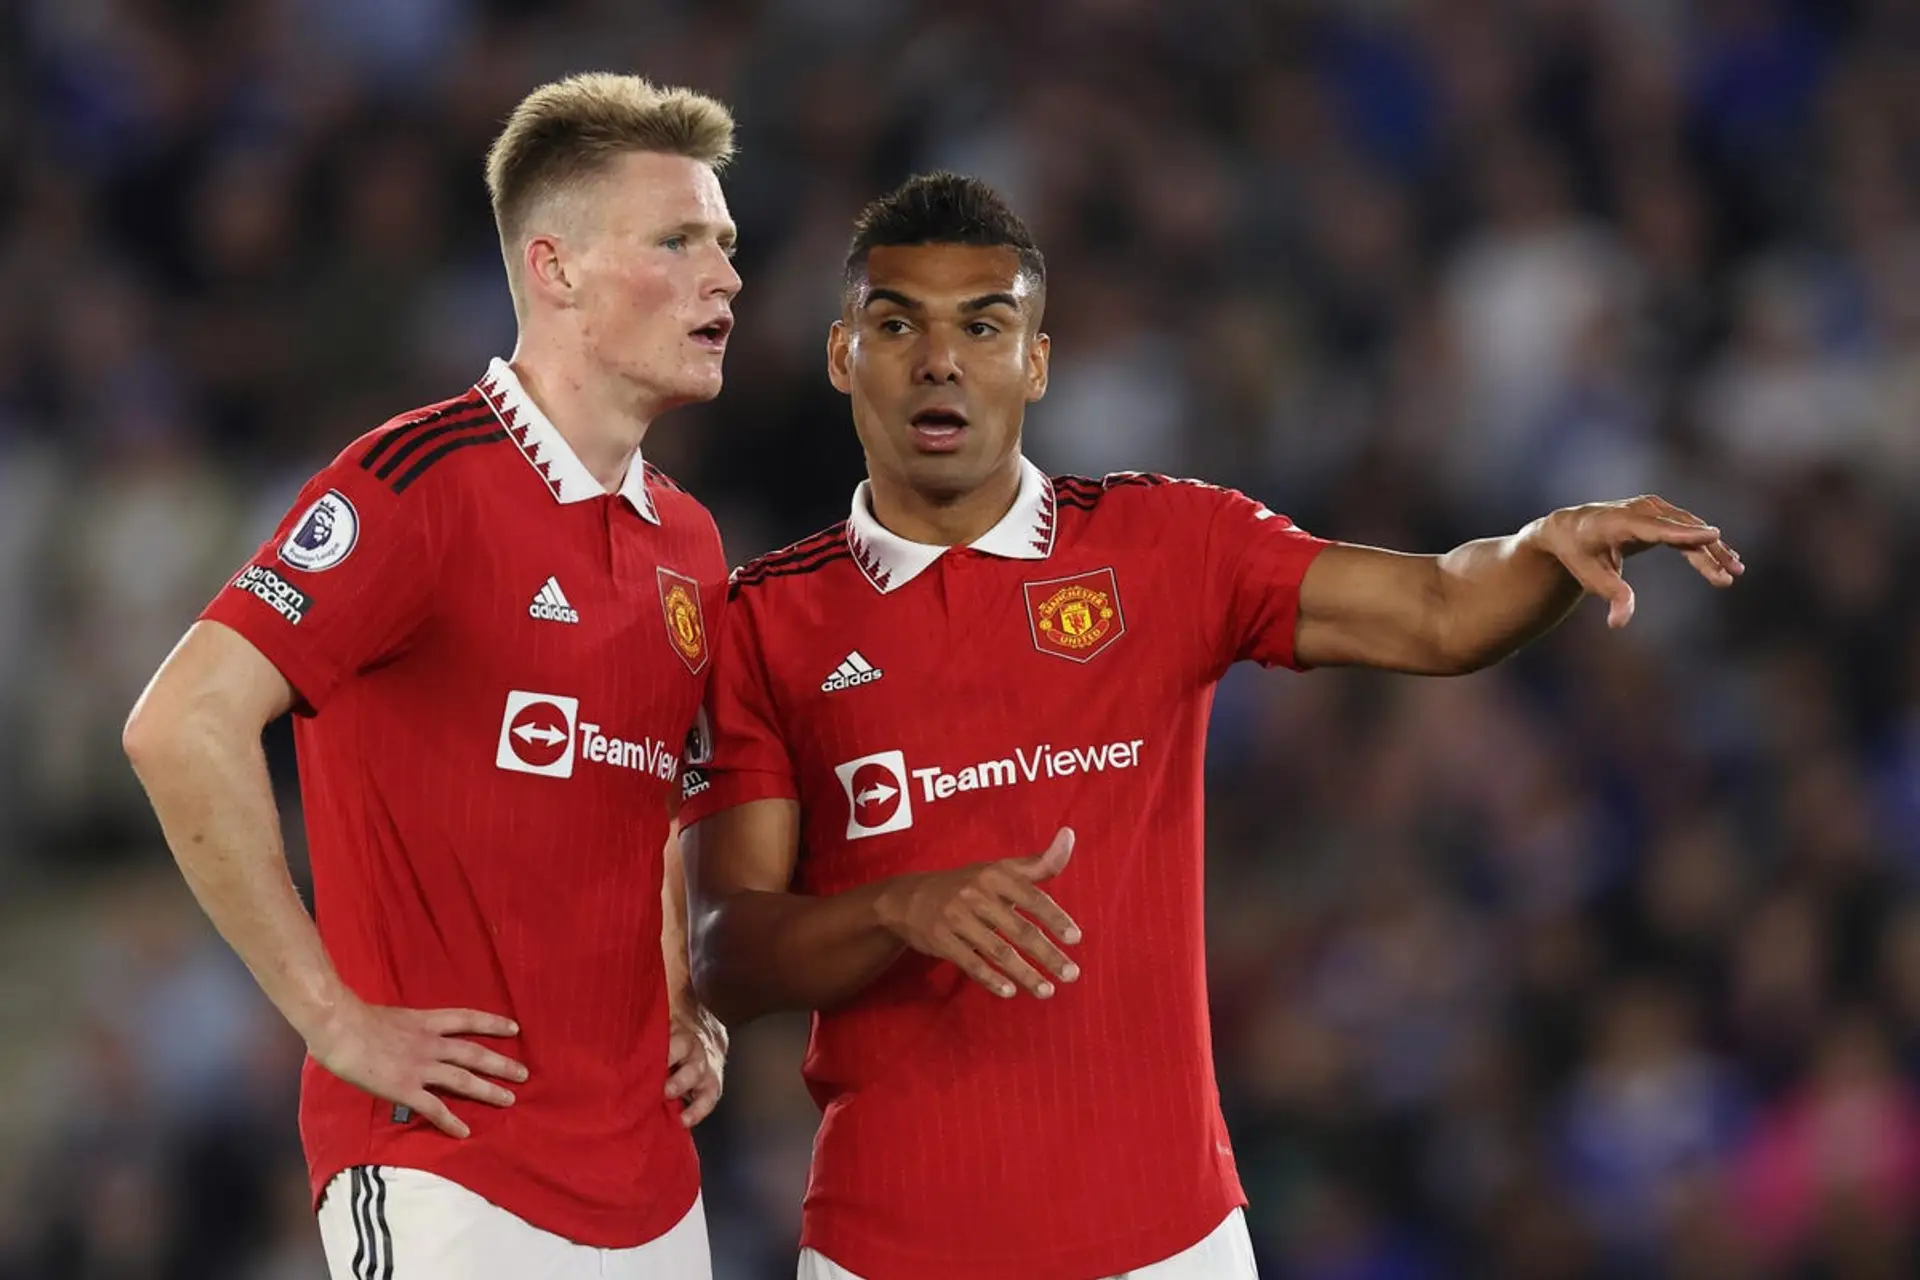 McTominay over Casemiro: Who should start for Man United against Omonia?